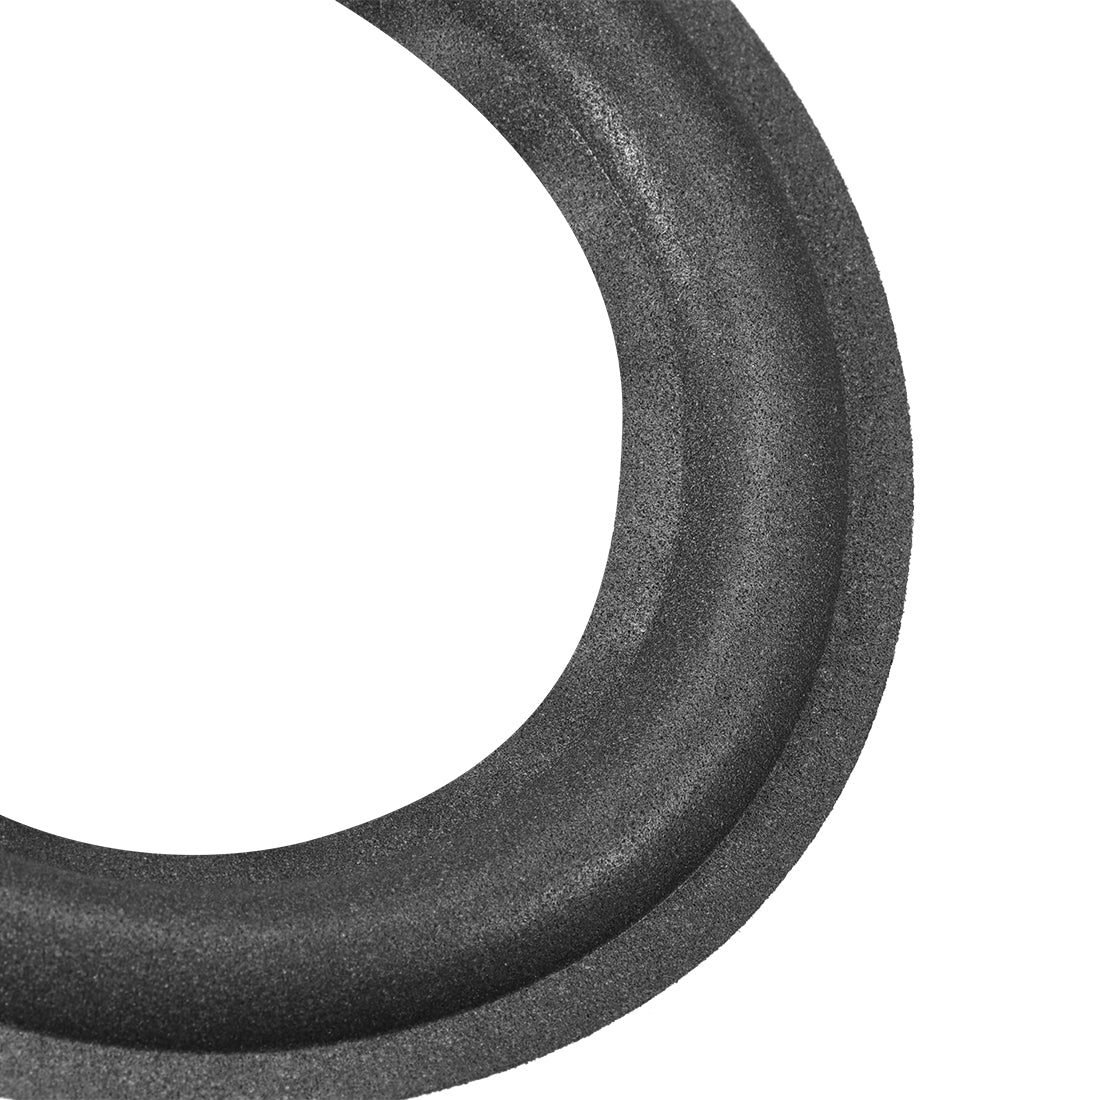 uxcell Uxcell 4.5" 4.5 Inch Foam Edge Surround Rings Replacement Parts for Repair or DIY 2pcs